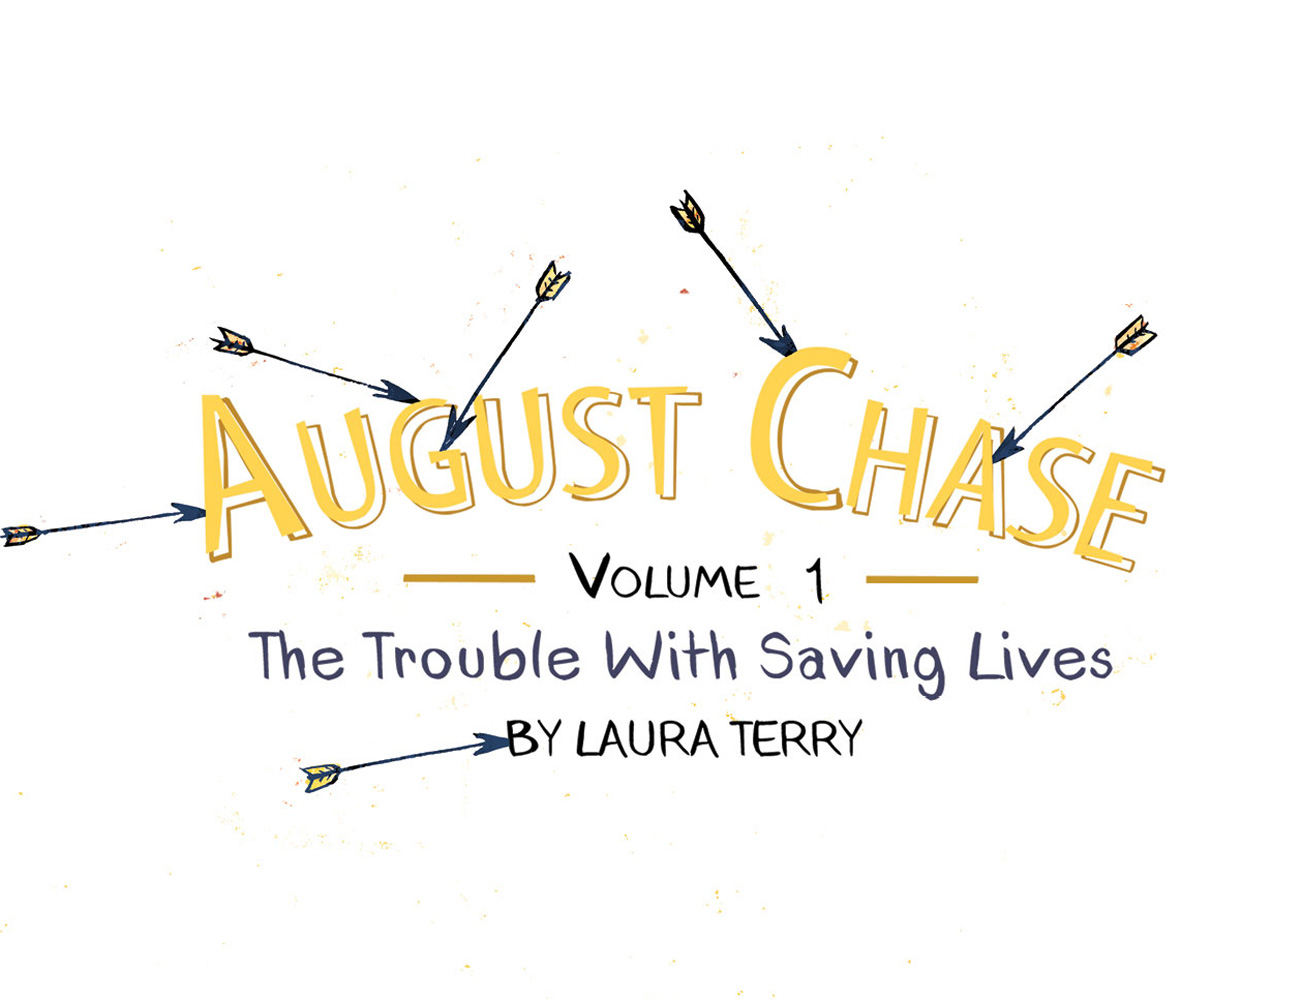 August Chase Volume 1 title by Laura Terry